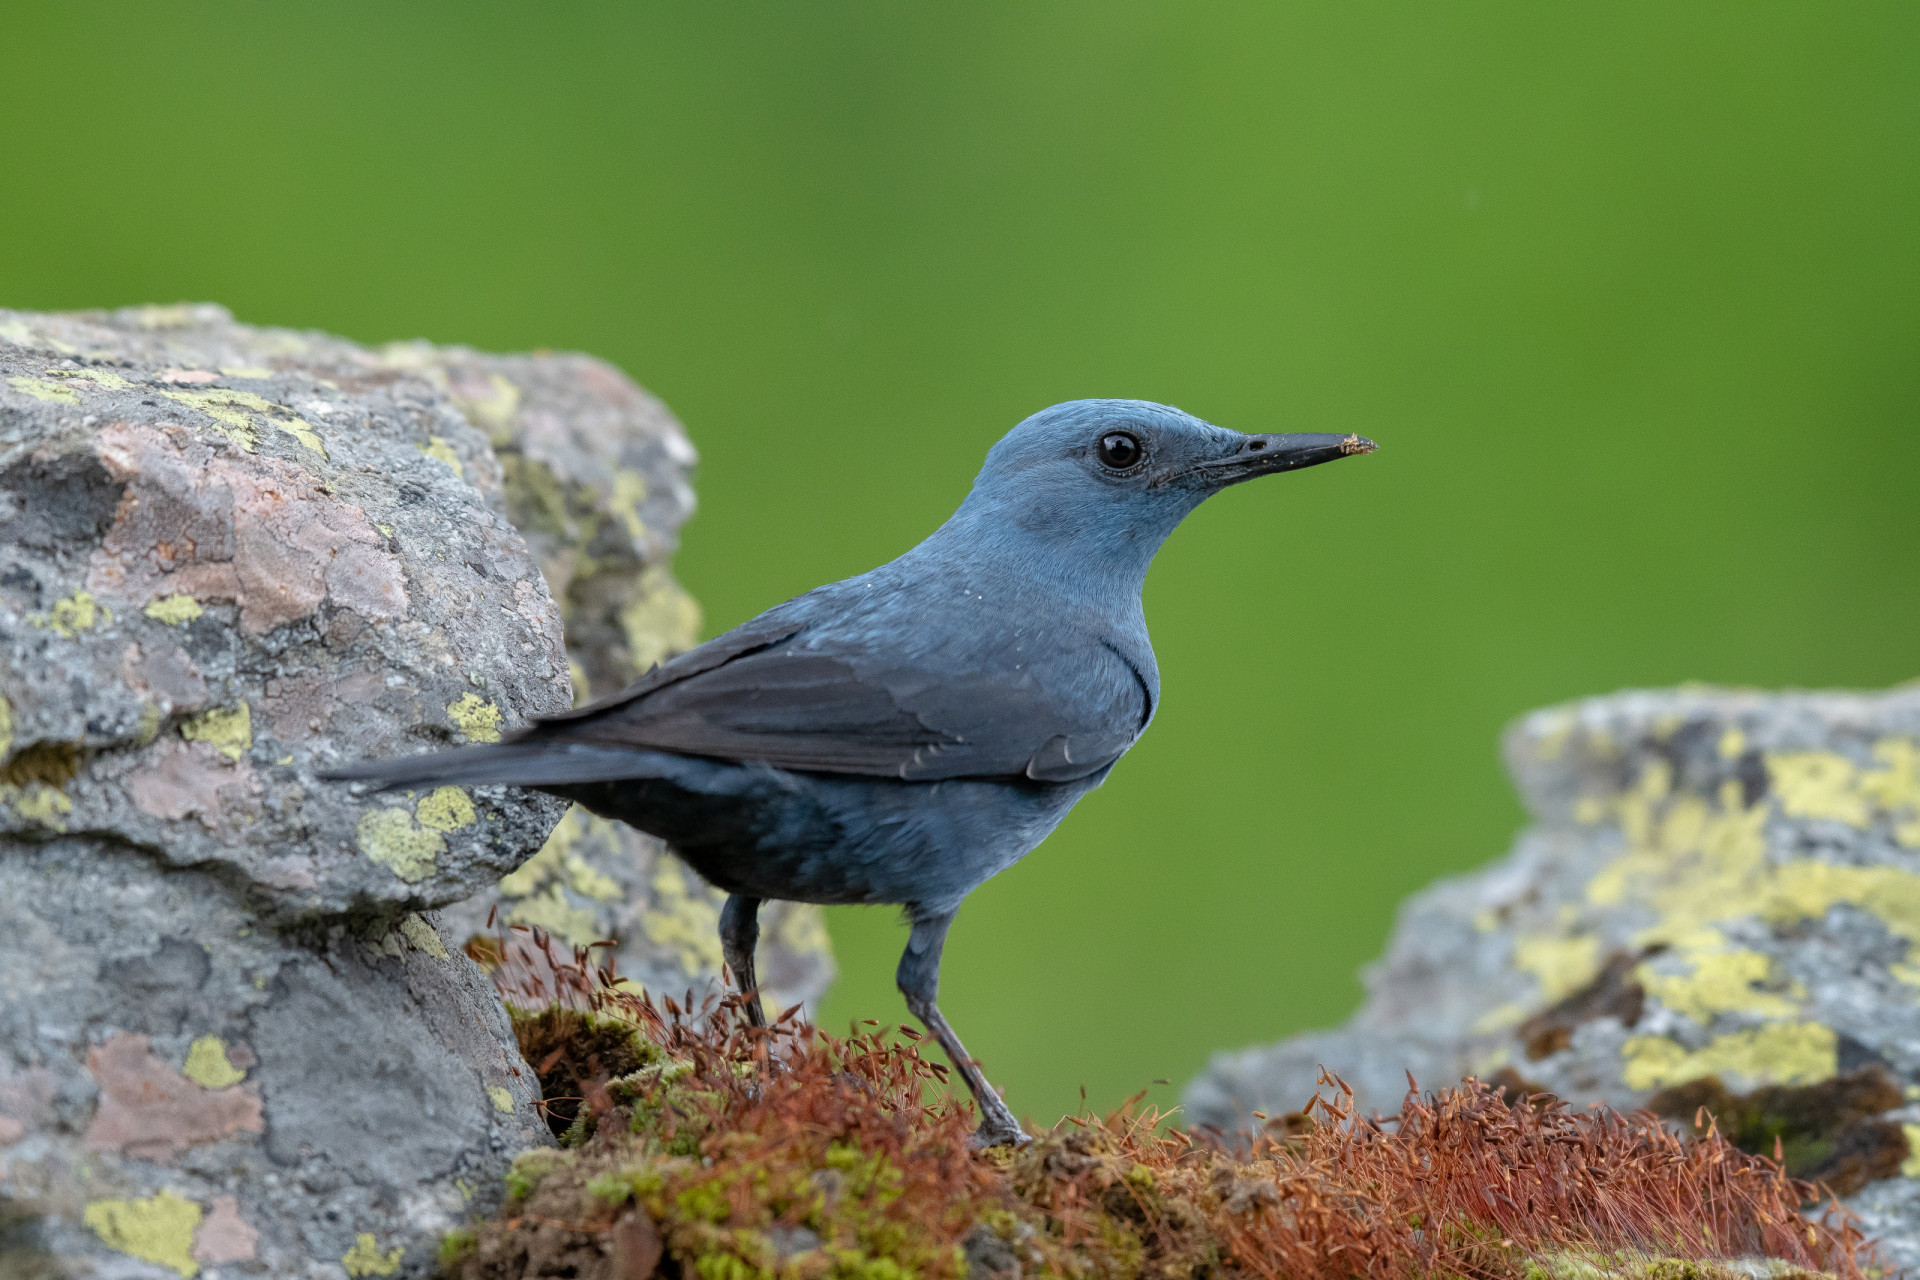 <p>The blue rock thrush, a member of the flycatcher family, chooses to breed among the sandstone rock formations and pockets of vegetation.</p><p><a href="https://www.msn.com/en-us/community/channel/vid-7xx8mnucu55yw63we9va2gwr7uihbxwc68fxqp25x6tg4ftibpra?cvid=94631541bc0f4f89bfd59158d696ad7e">Follow us and access great exclusive content every day</a></p>